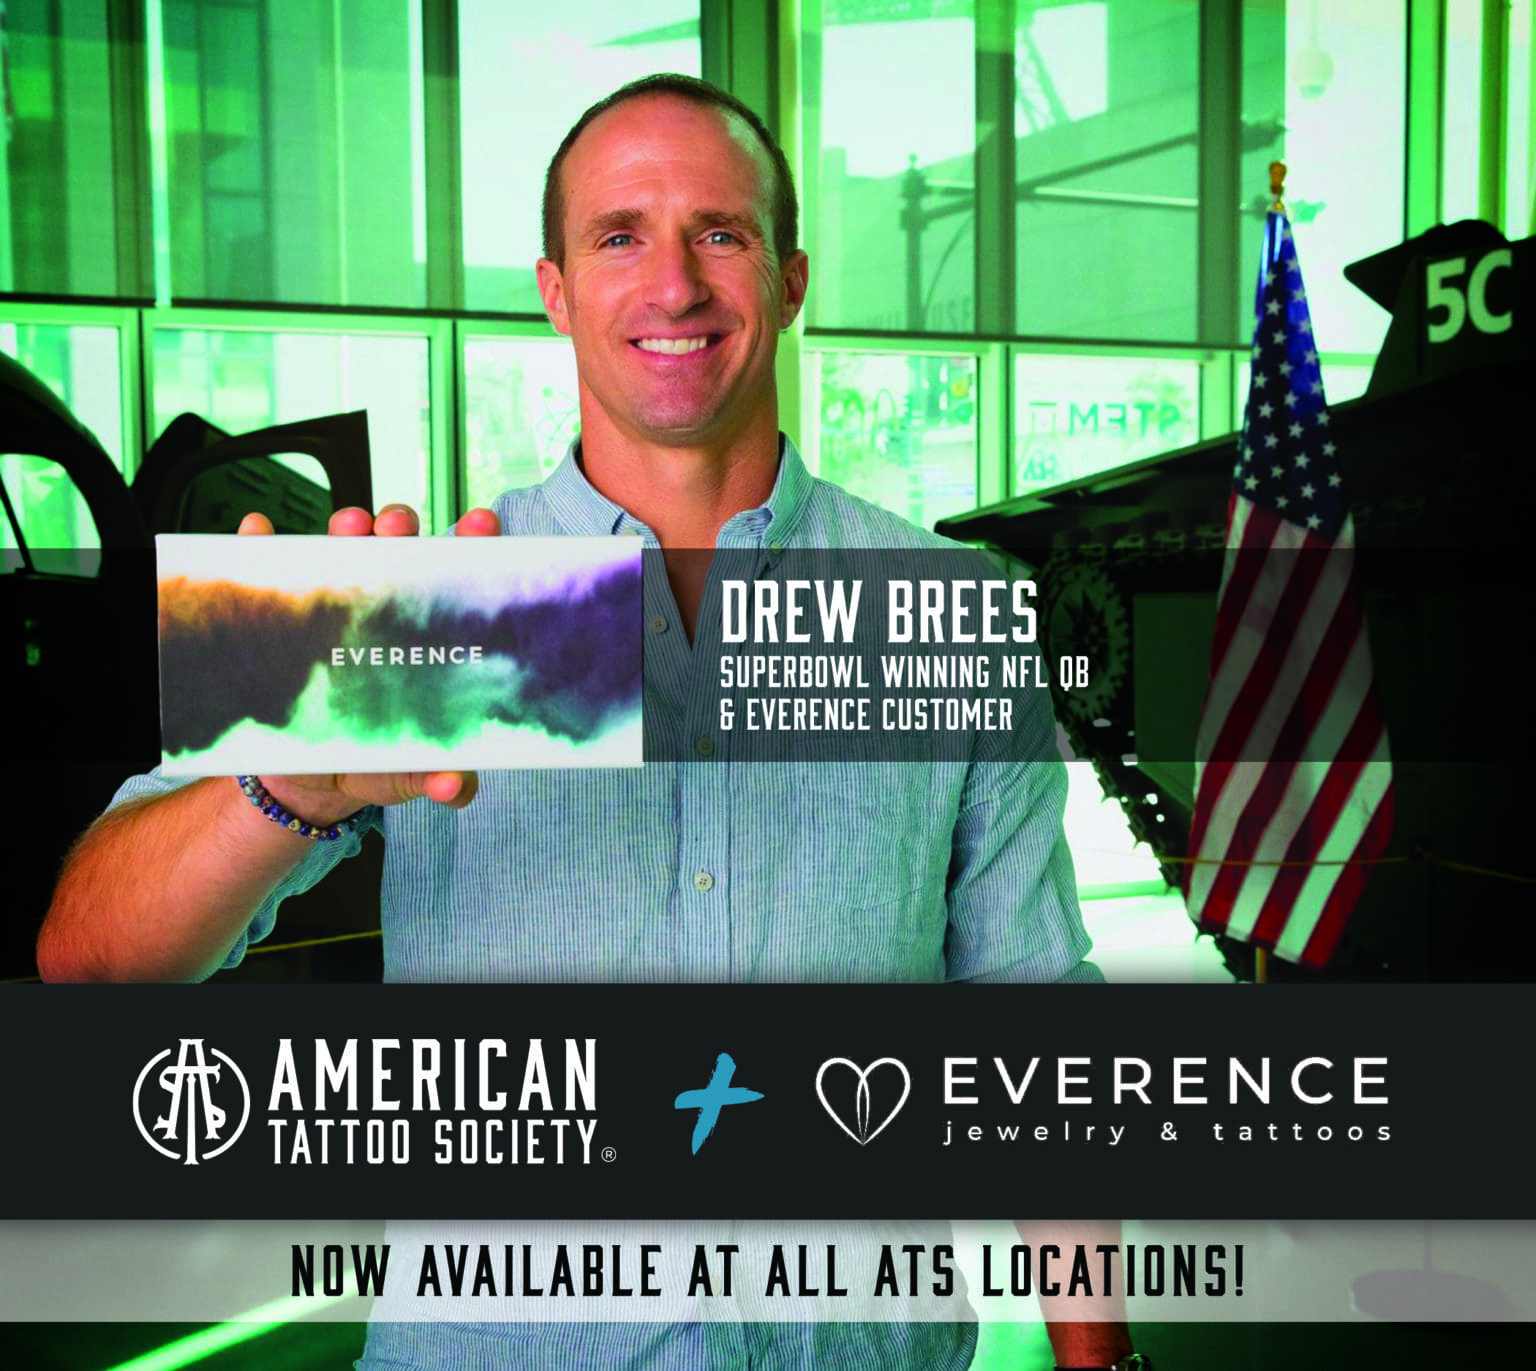 American Tattoo Society Partners with Everence | American Tattoo Society